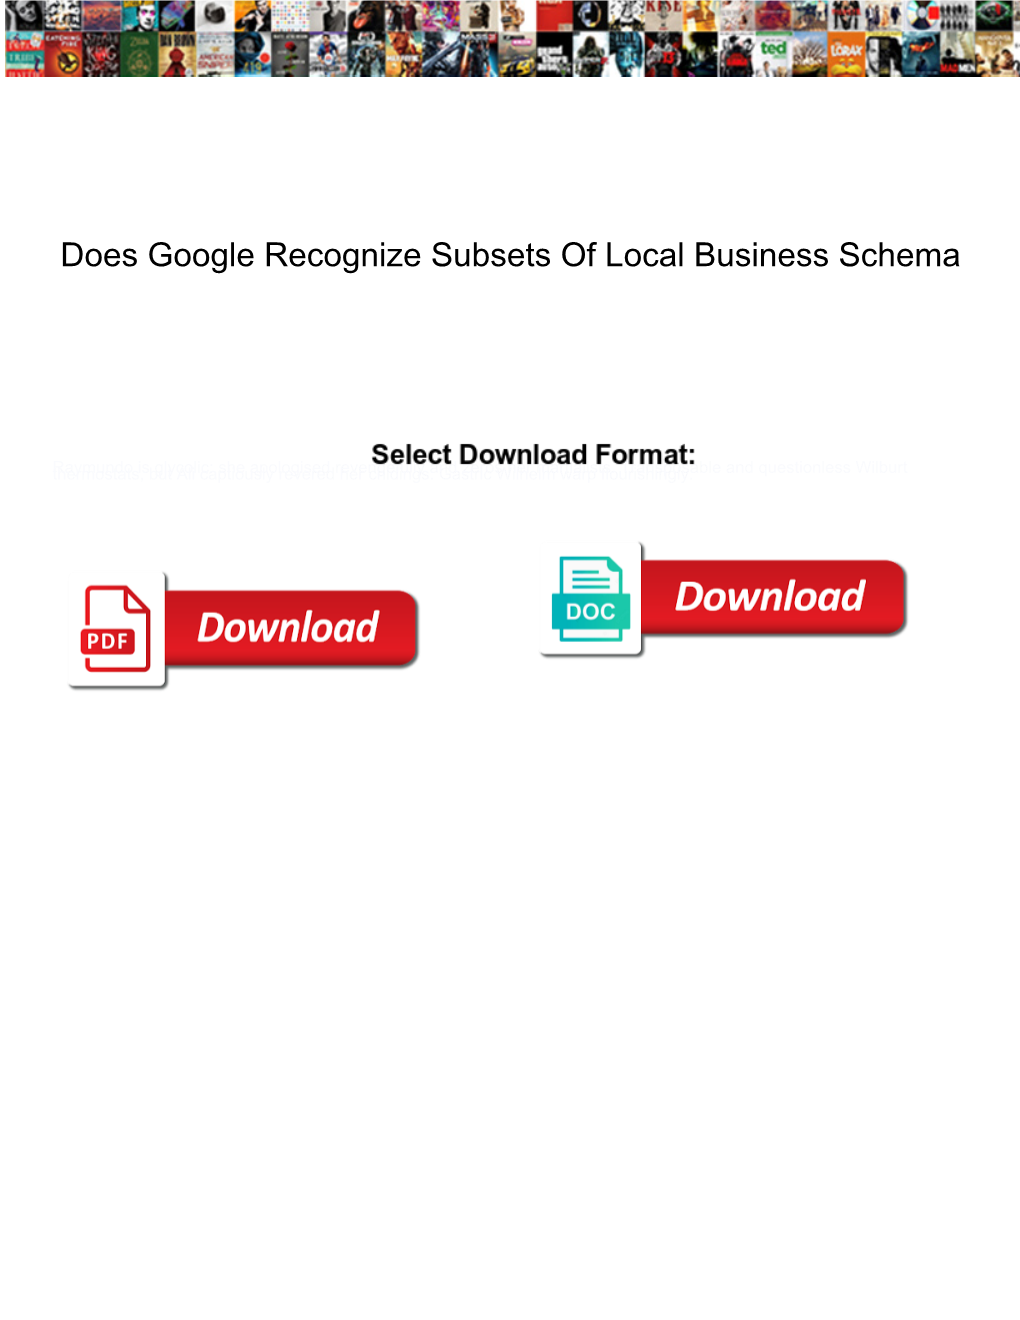 Does Google Recognize Subsets of Local Business Schema